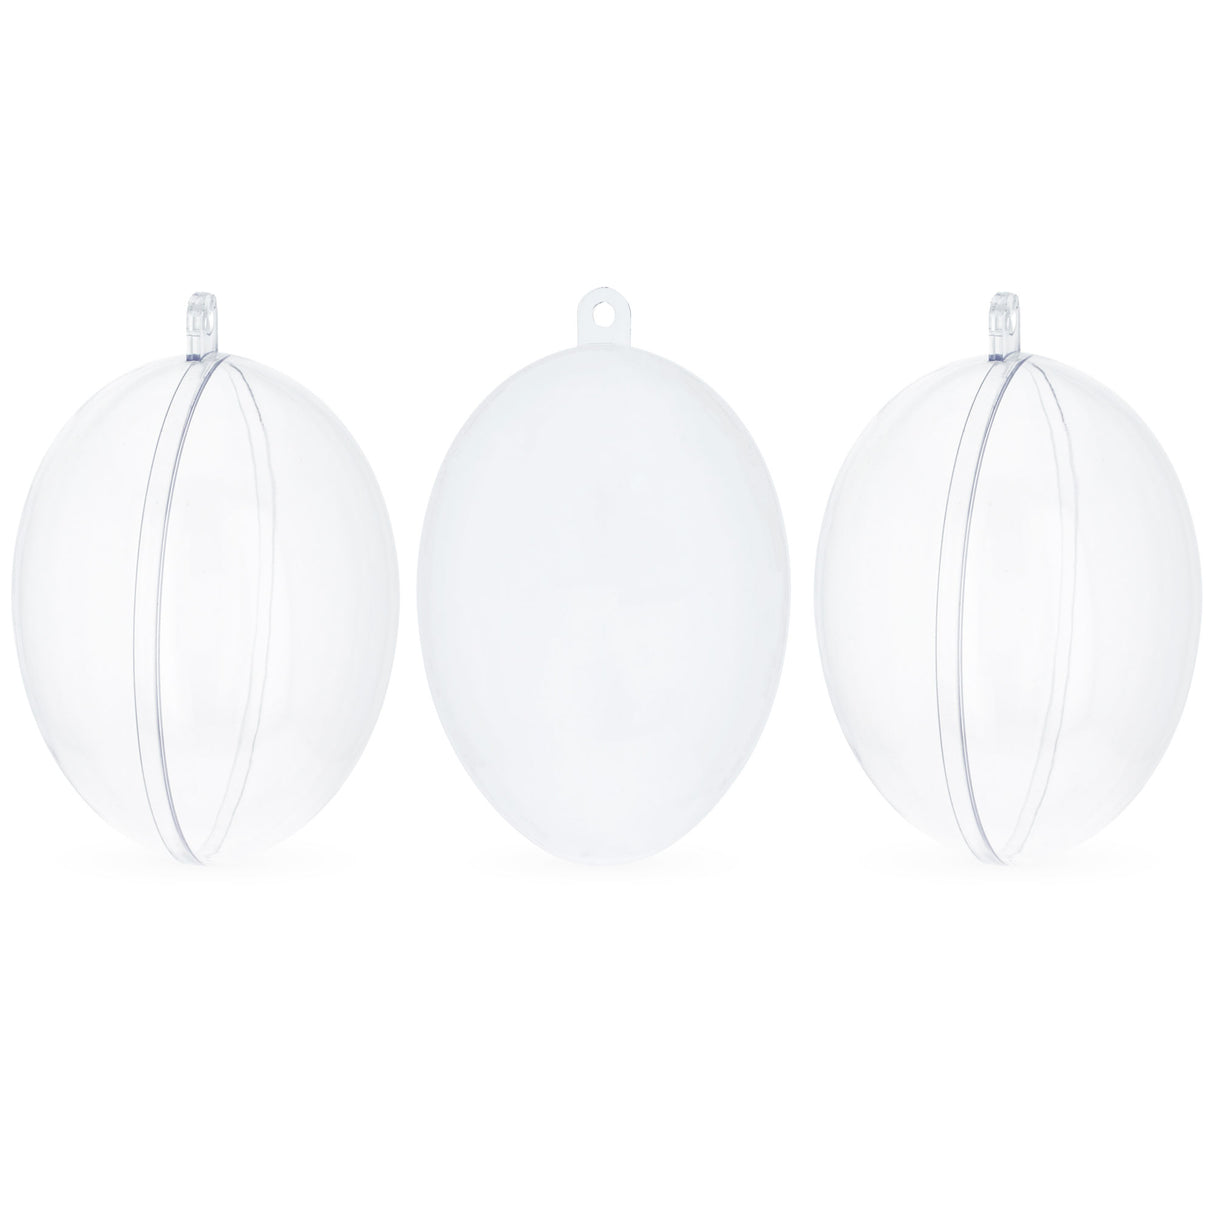 Set of 3 Clear Plastic Egg Ornaments 3.4 Inches (86 mm) in Clear color, Oval shape